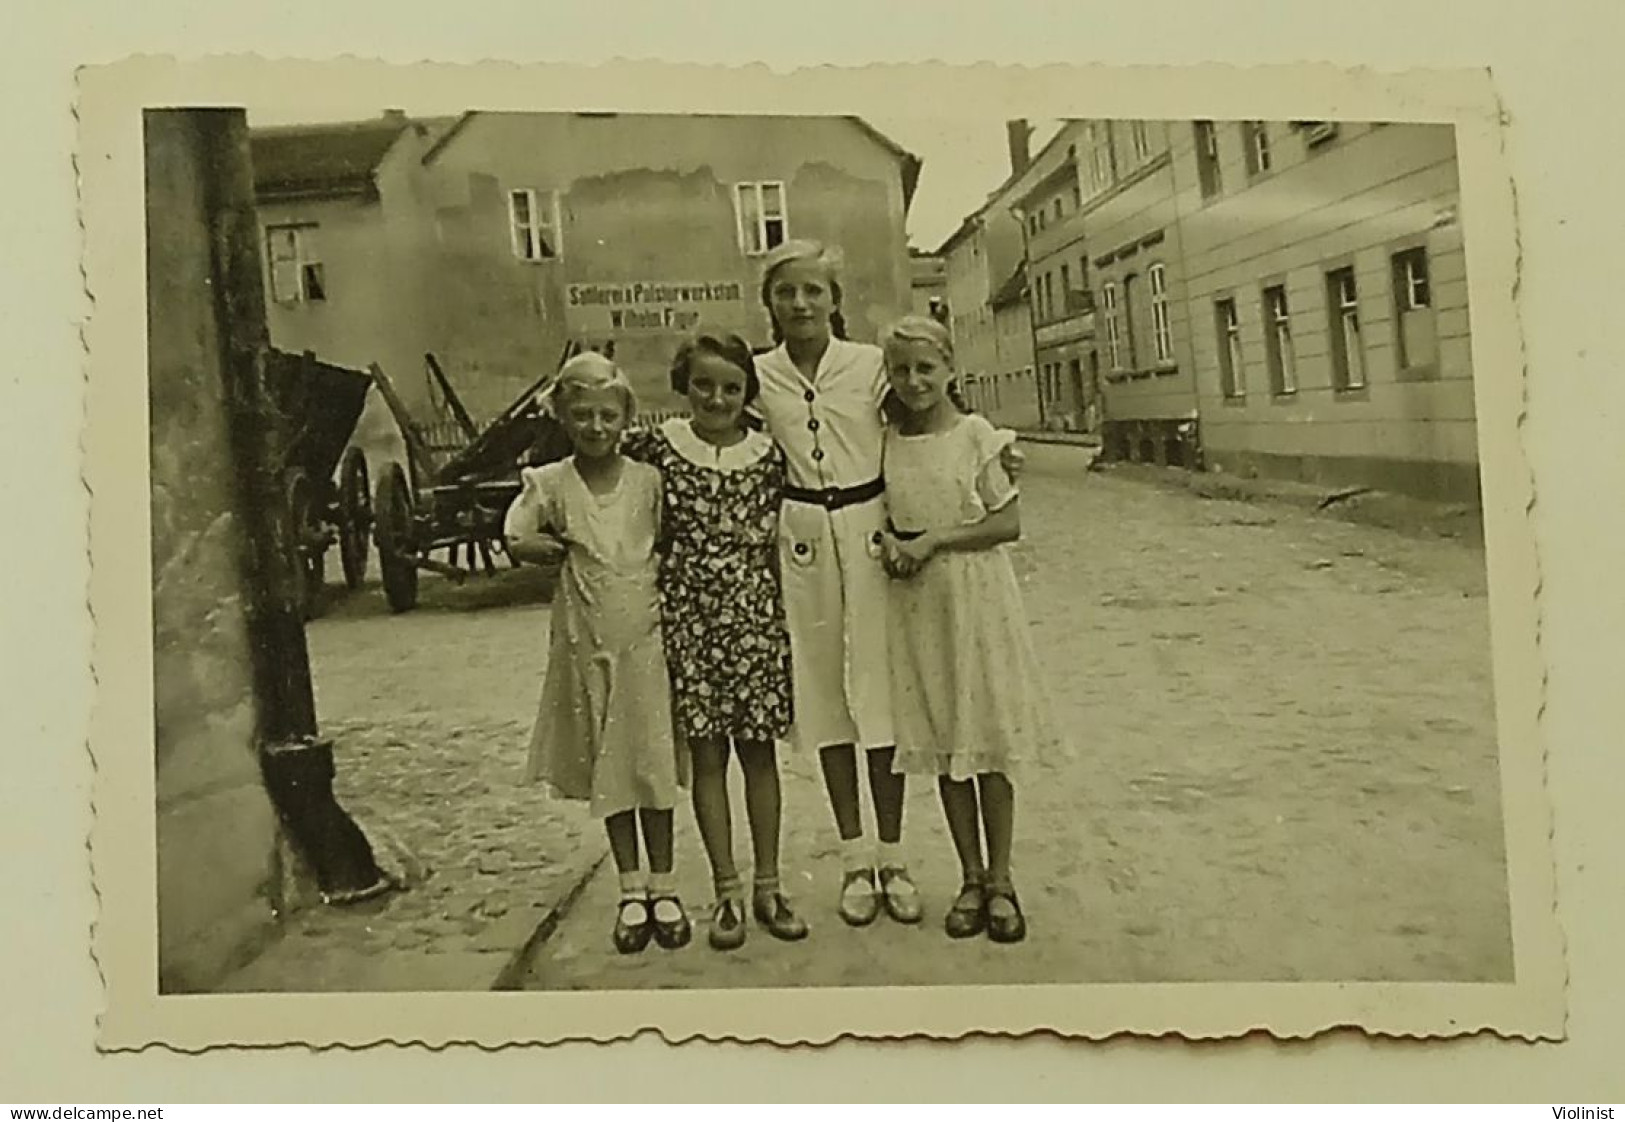 Germany-Four Young Girls Standing On The Street-Photo Gowir,Finsterwalde-old Photo - Places